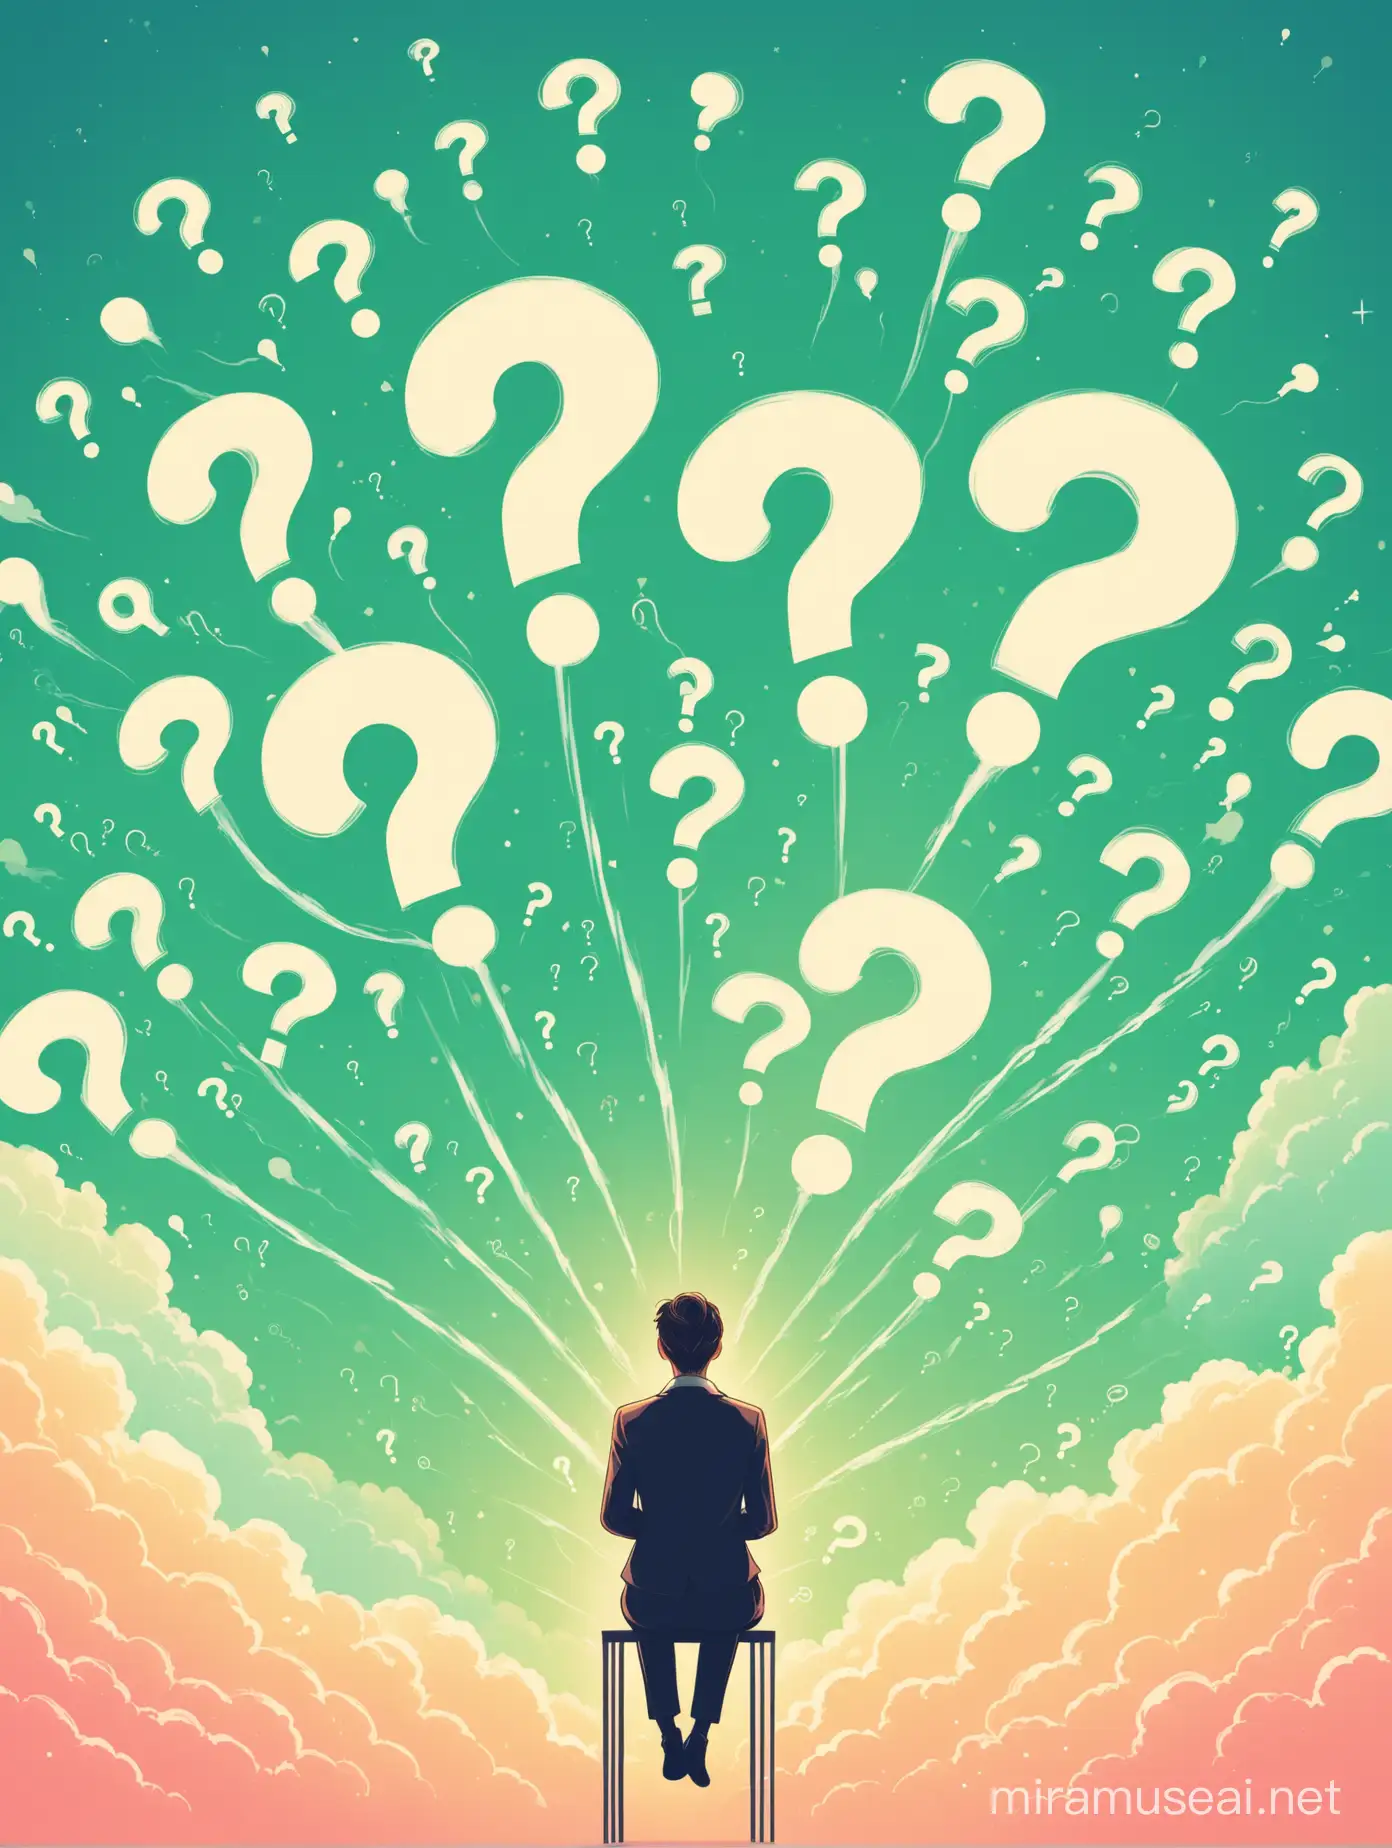 a person sitting  with multiple question marks hovering in the air


